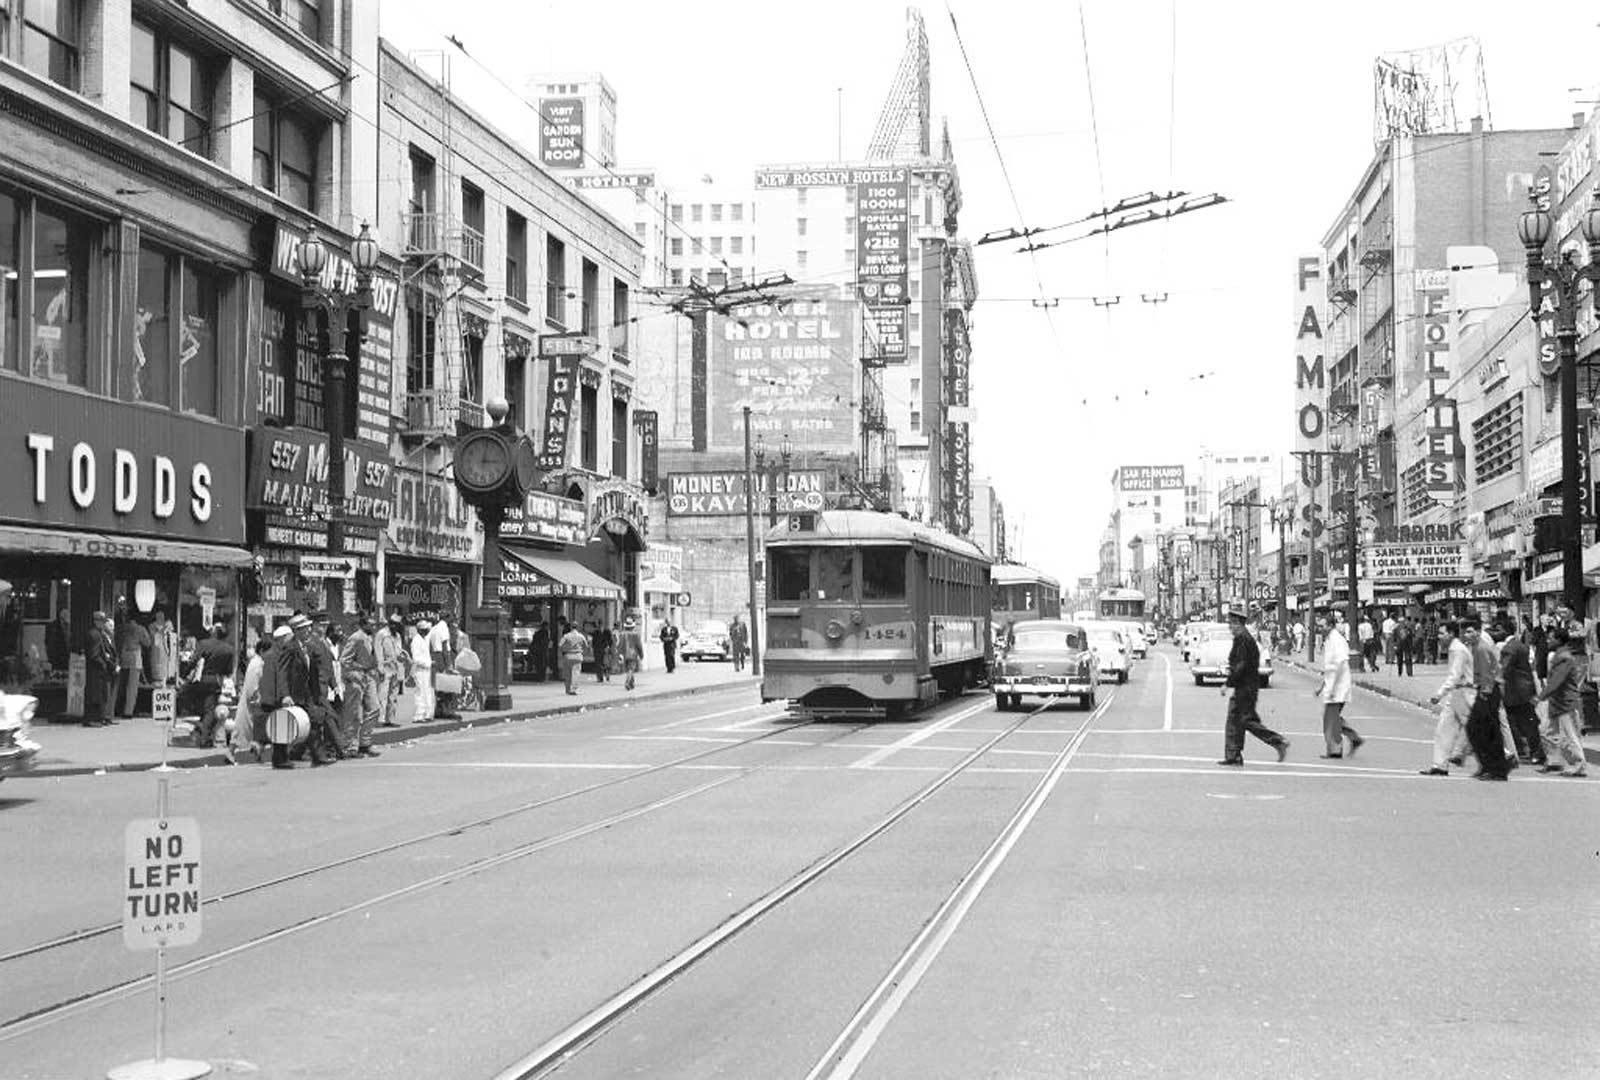 Los Angeles Transit Lines streetcar on Line 8 southbound on Main at 6th Streets in Downtown Los Angeles.